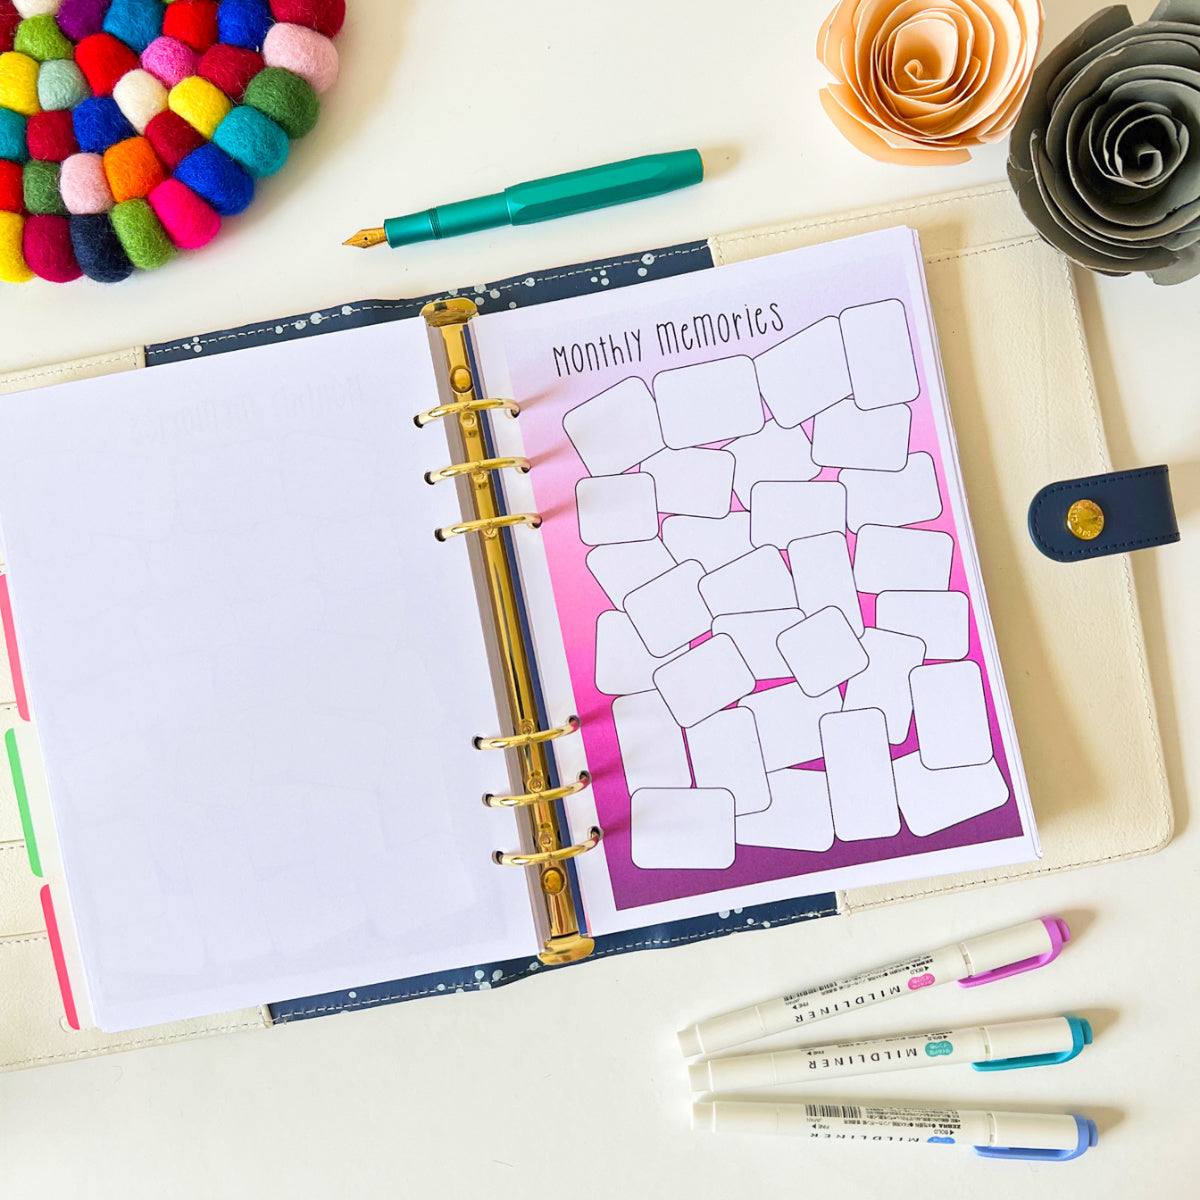 An open planner lies on a table with a "Memory Log" page displaying blank boxes for notes, perfect for capturing positive moments of everyday life. Nearby are colorful markers, a green pen, two decorative flower figures, and a multicolored pom-pom coaster, creating a vibrant workspace.